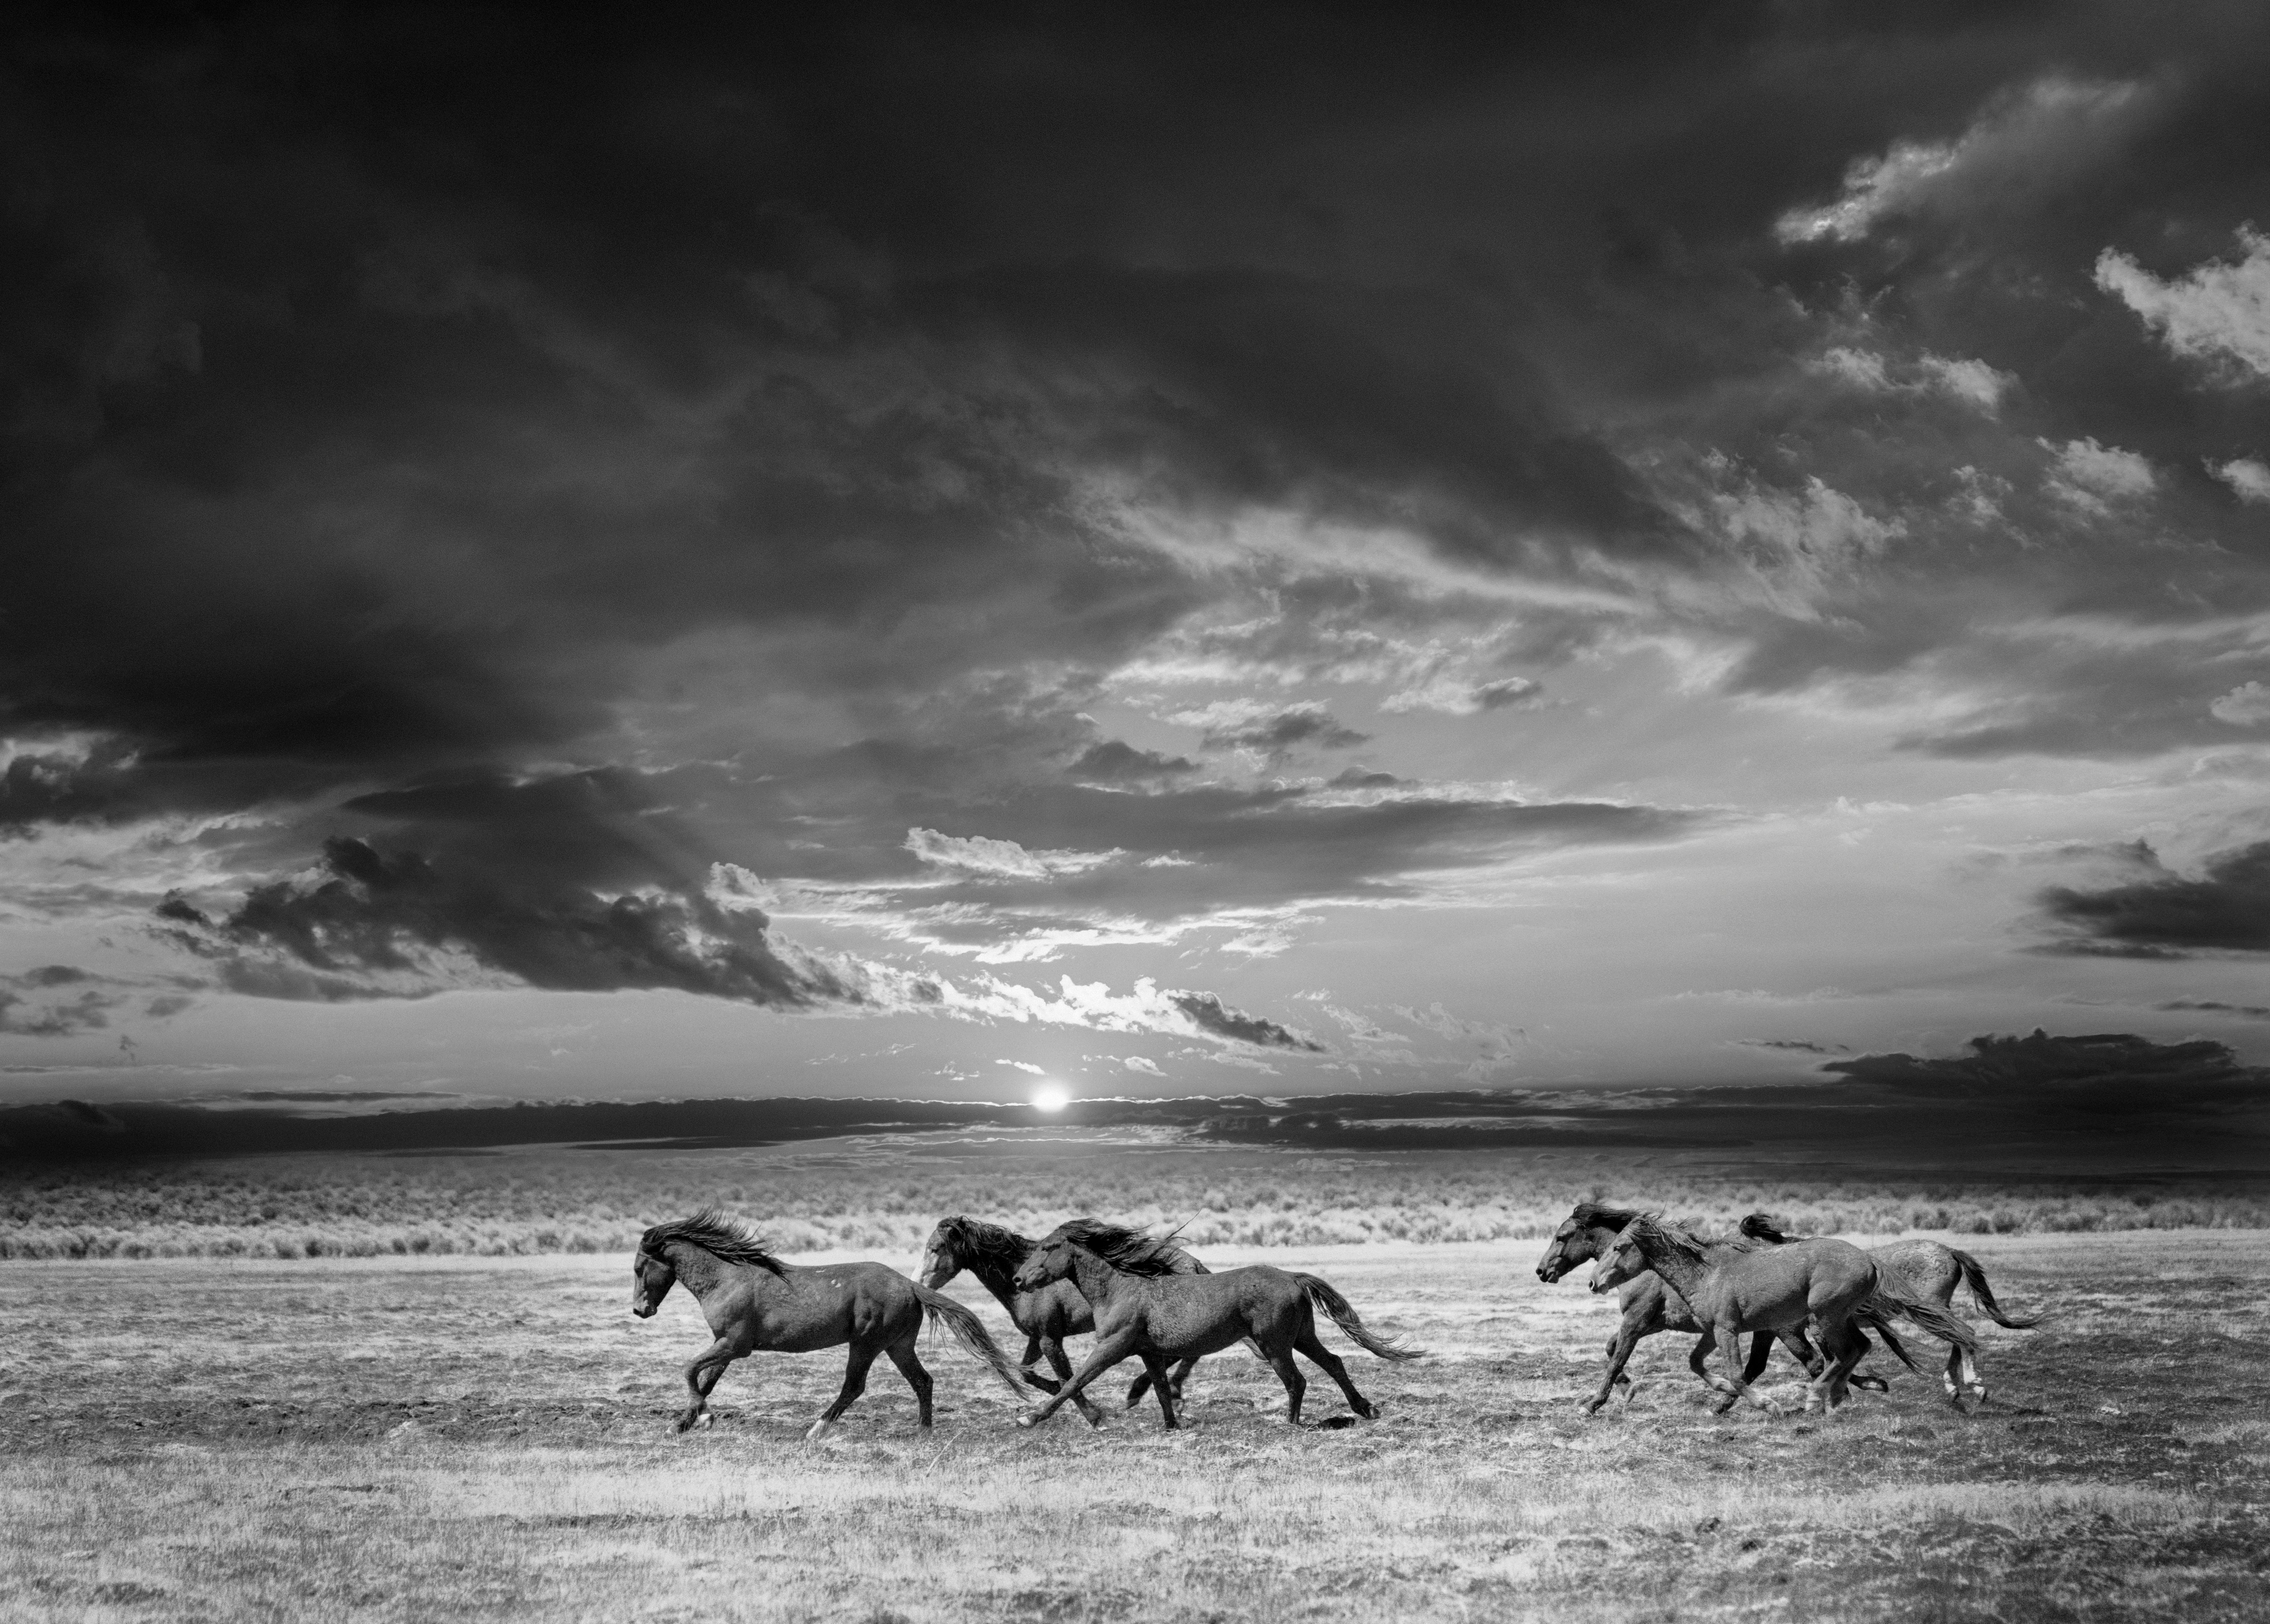 Shane Russeck Animal Print - Chasing the Light  20x30 -  Wild Horses Photography - Special 1stdibs Price 